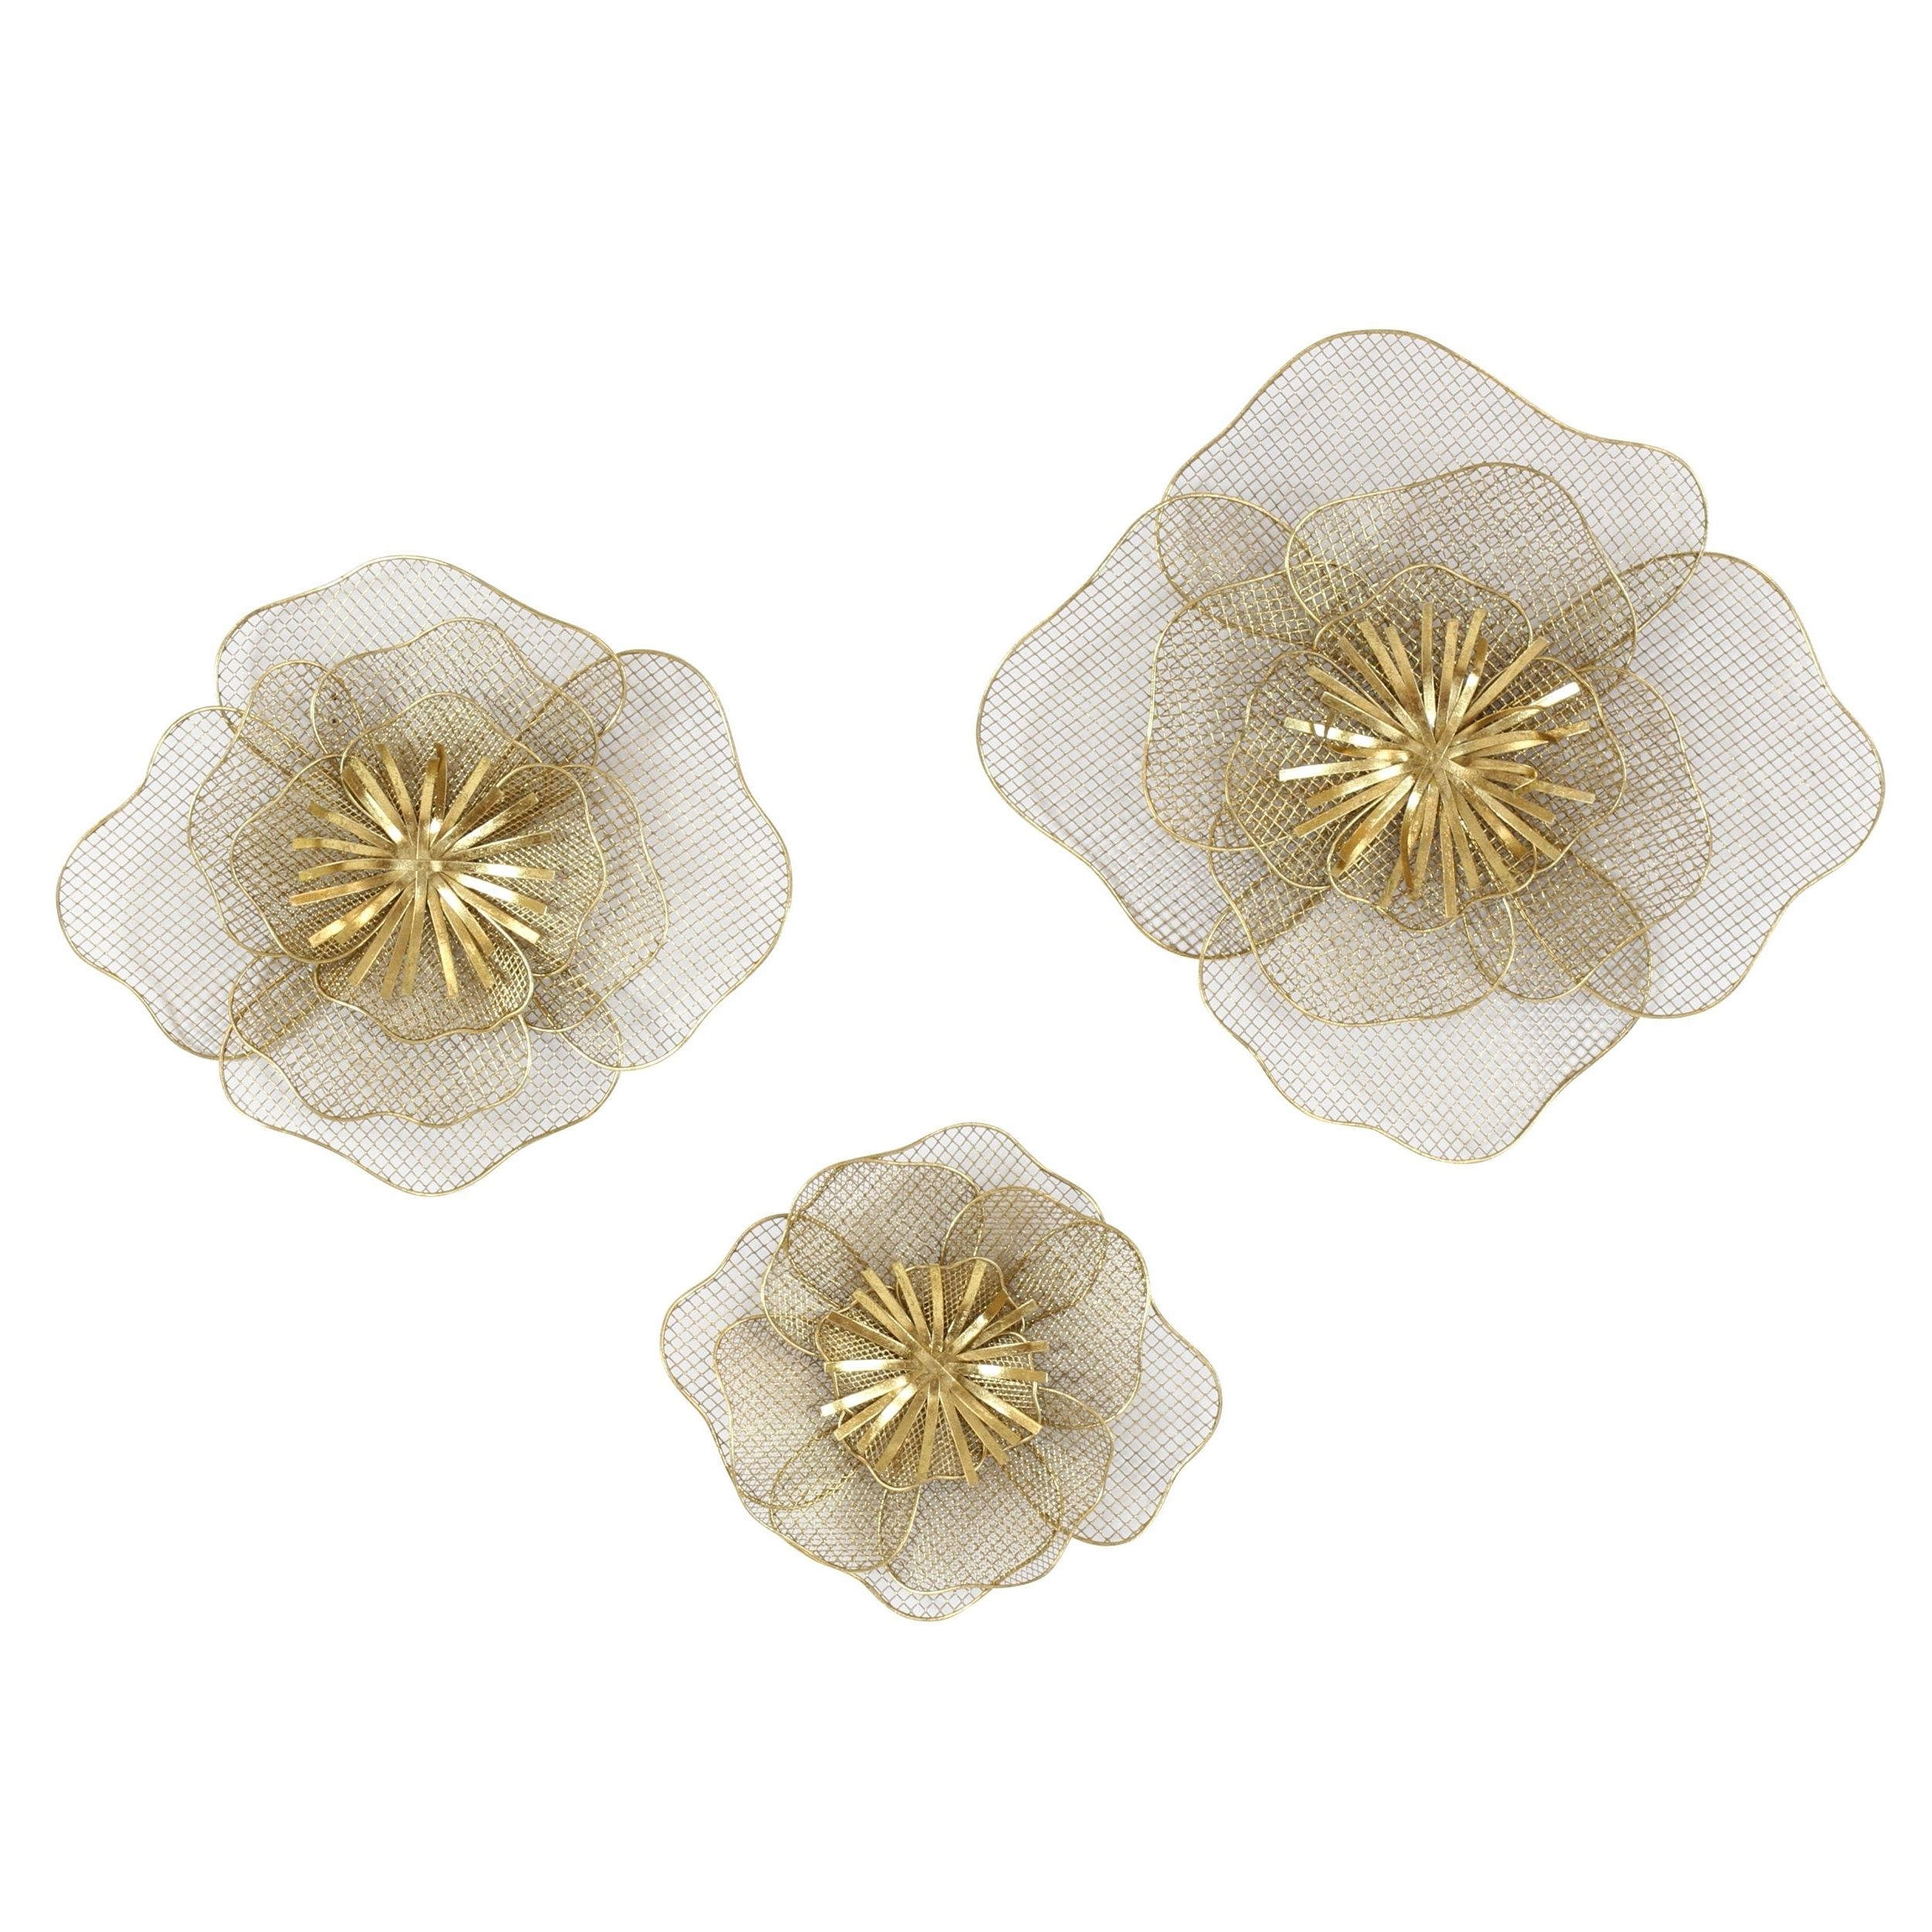 Metal Flower Wall Decor (set Of 3) With Regard To Most Current Shop Lori Metal Flowers Wall Decor (set Of 3) – Free Shipping Today (View 3 of 20)